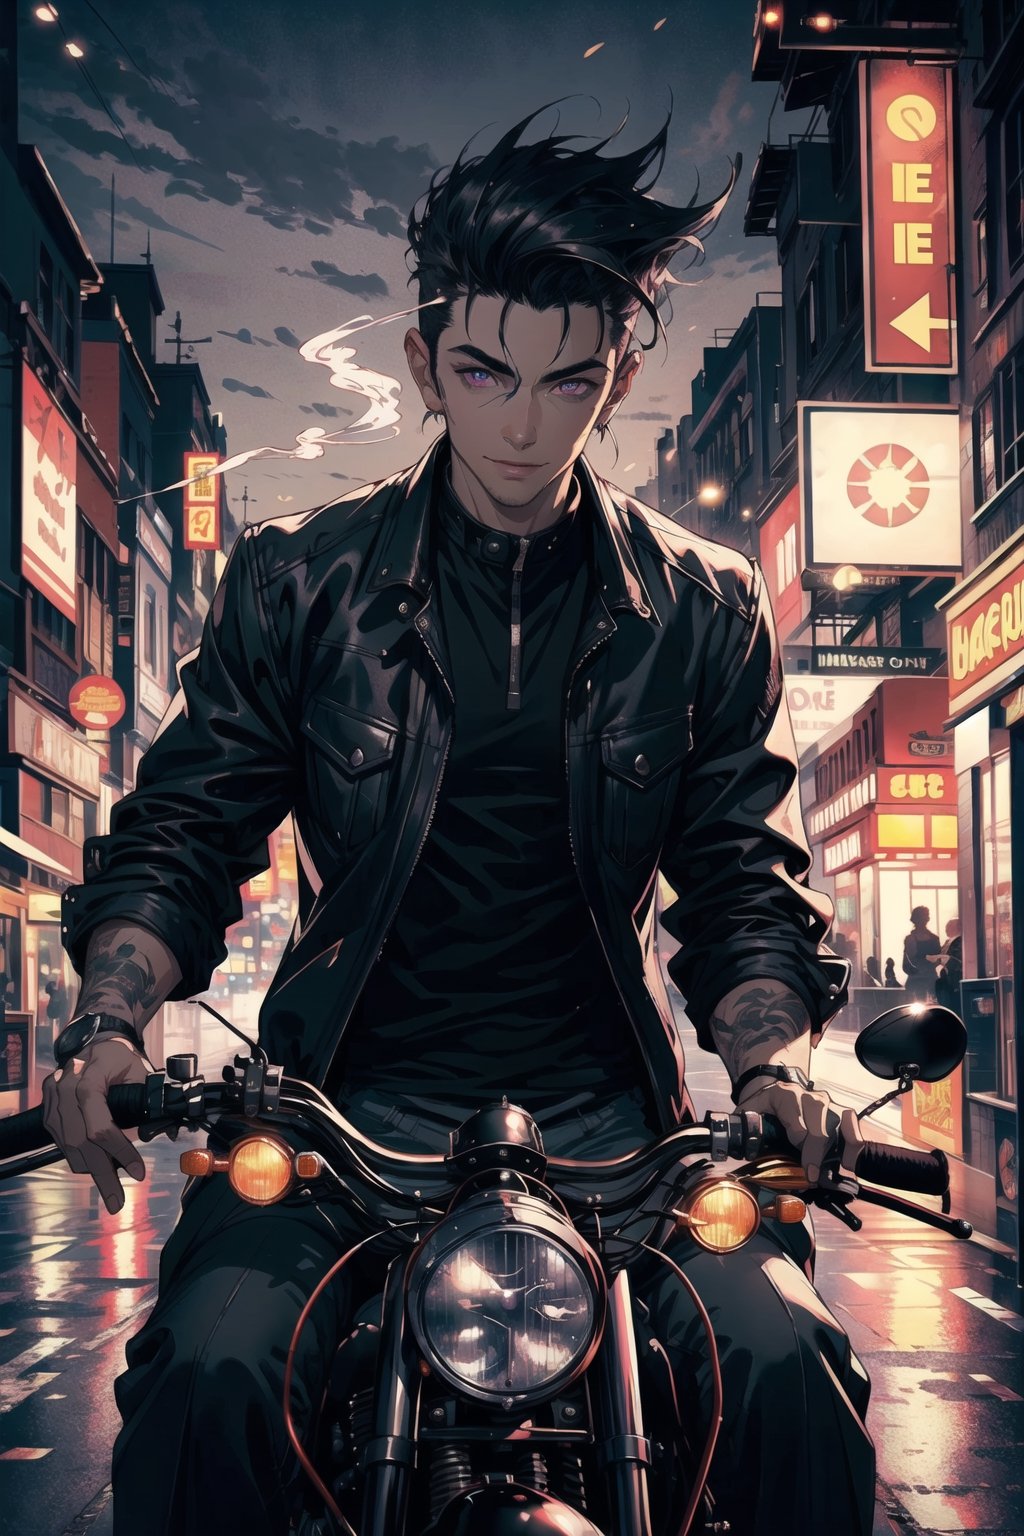 A portrait of handsome man wearing a black jacket, smoking, black hair colour, riding a harley davidson, quiff haircut, 25 year age, bright lighting, ground fork, low light, highly detailed 8k, smile expression, glowing purple eyes, midjourney, road background, High detailed 